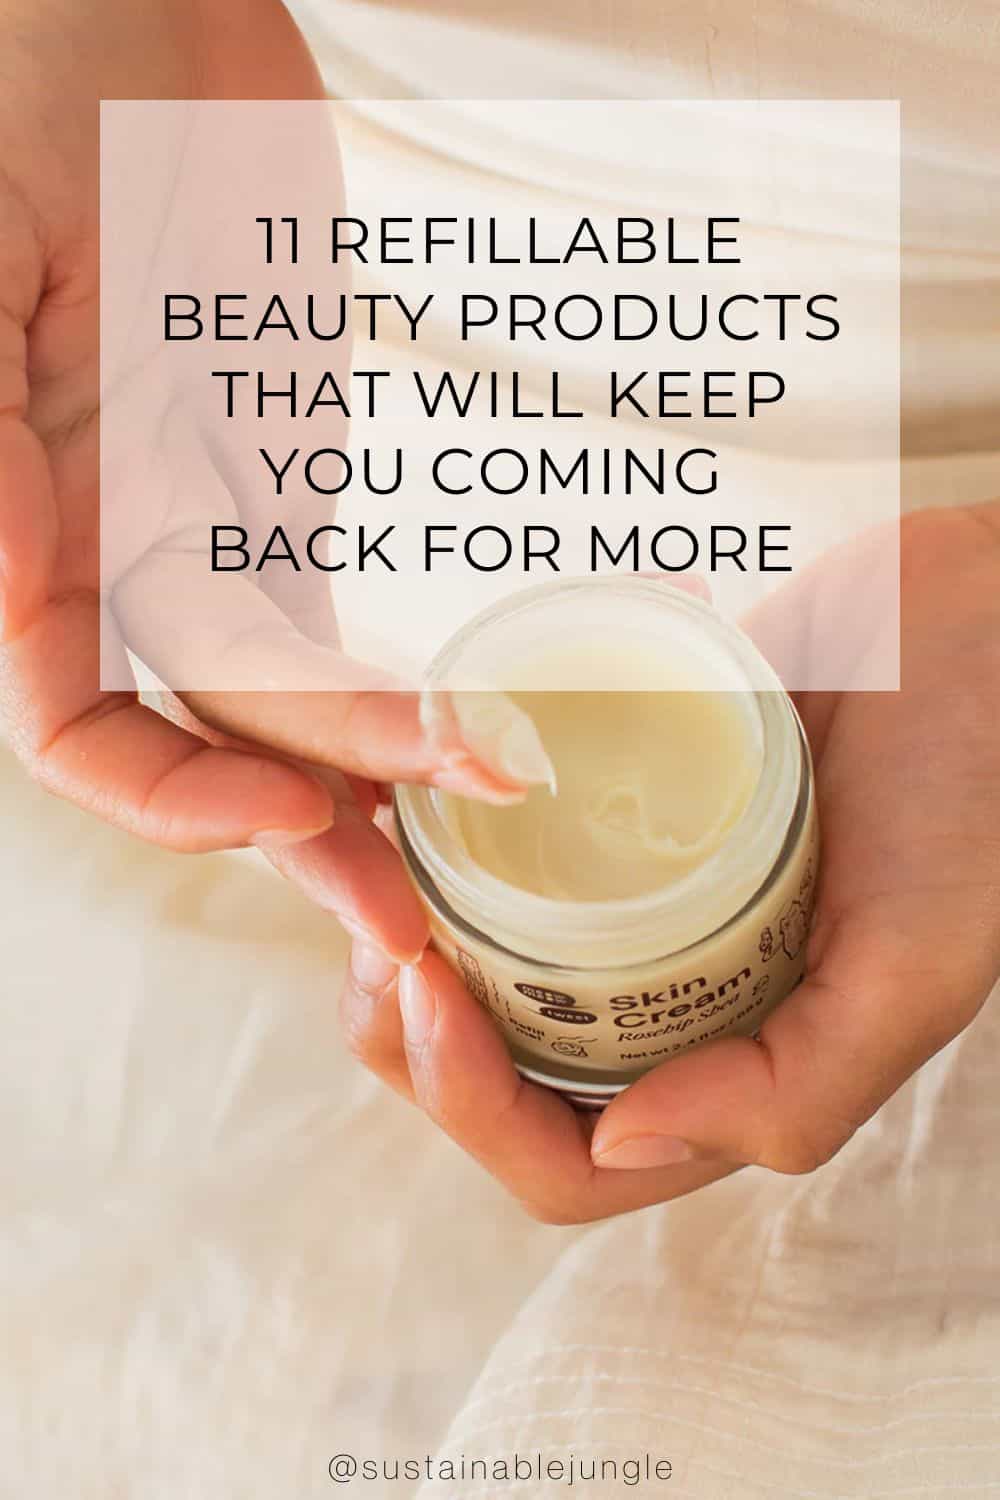 11 Refillable Beauty Products That Will Keep You Coming Back For More Image by Meow Meow Tweet #refillablebeautyproducts #refillableskincare #refillableskincarepackaging #bestrefillablebeautyproducts #refillablebeautybrands #sustainablejungle